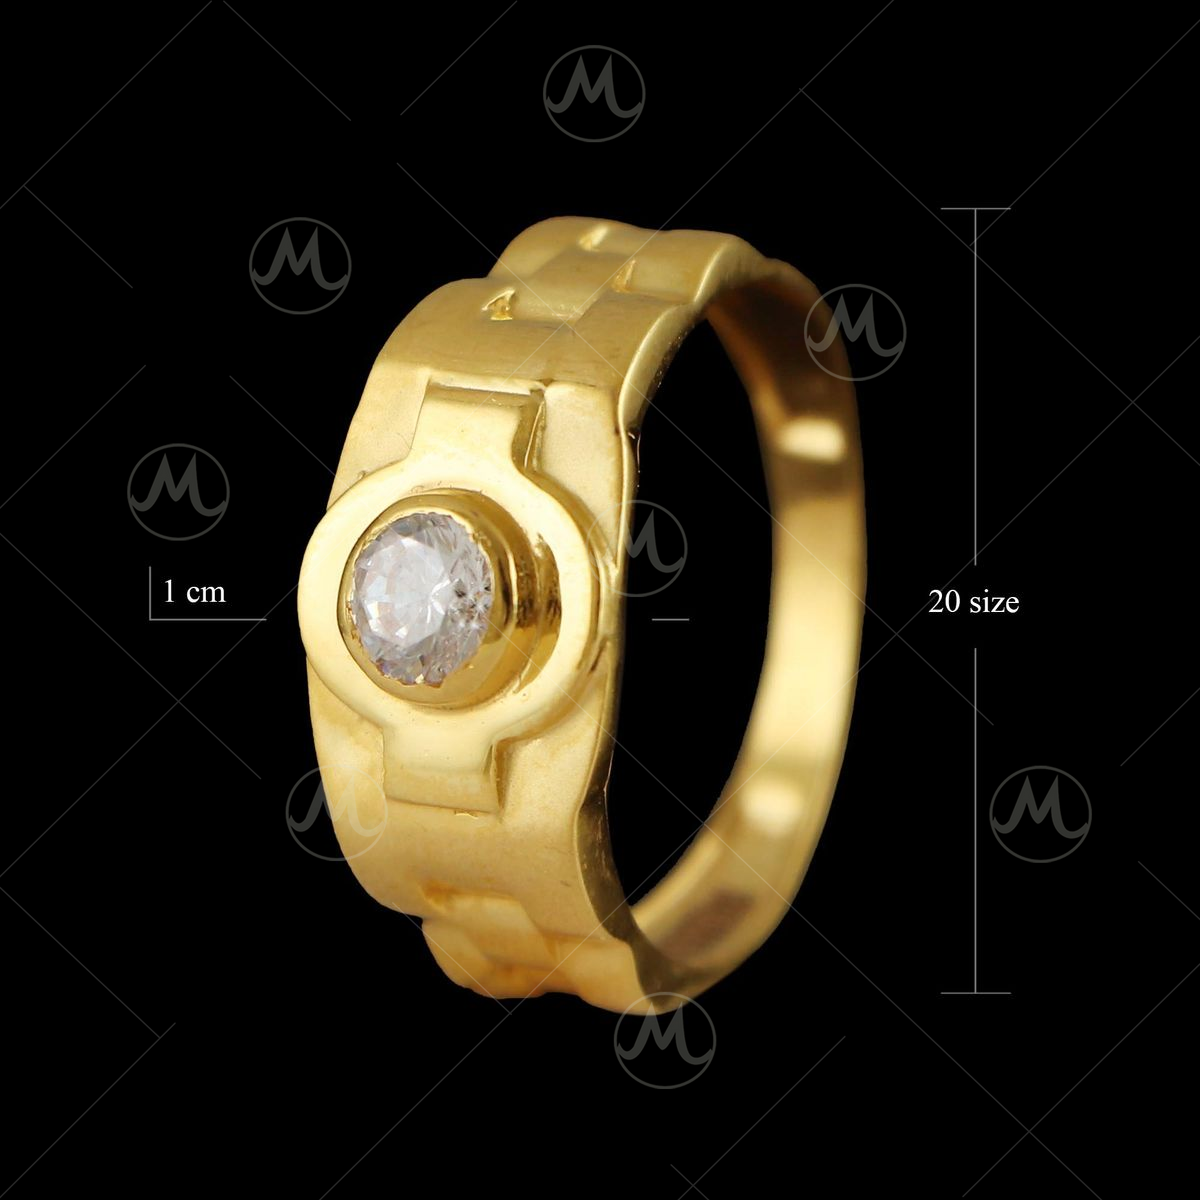 Buy ring watch Online in INDIA at Low Prices at desertcart